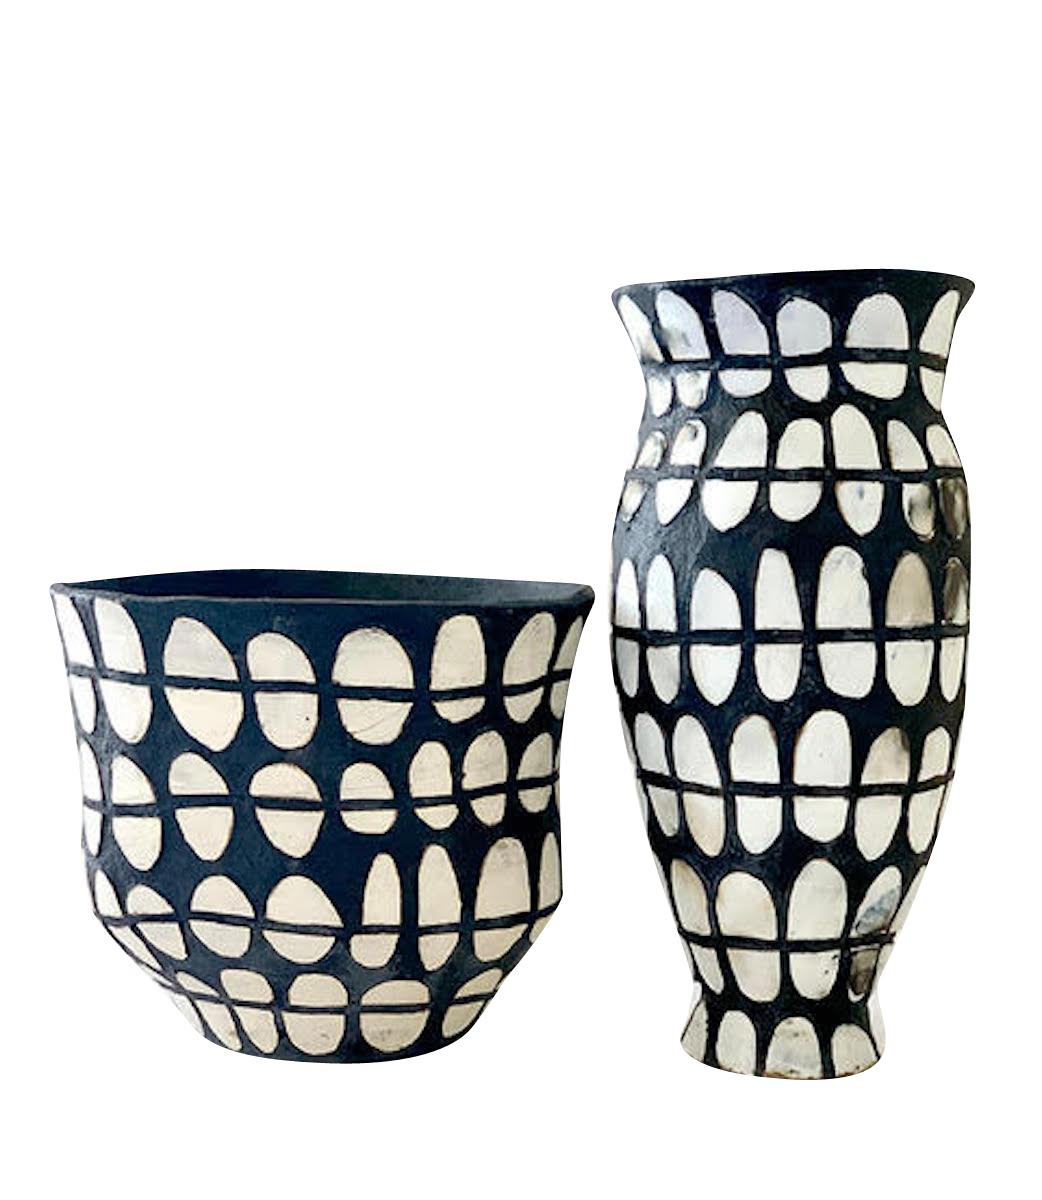 North American Black and White Dot Design Tall Vase By Brenda Holzke, USA, Contemporary